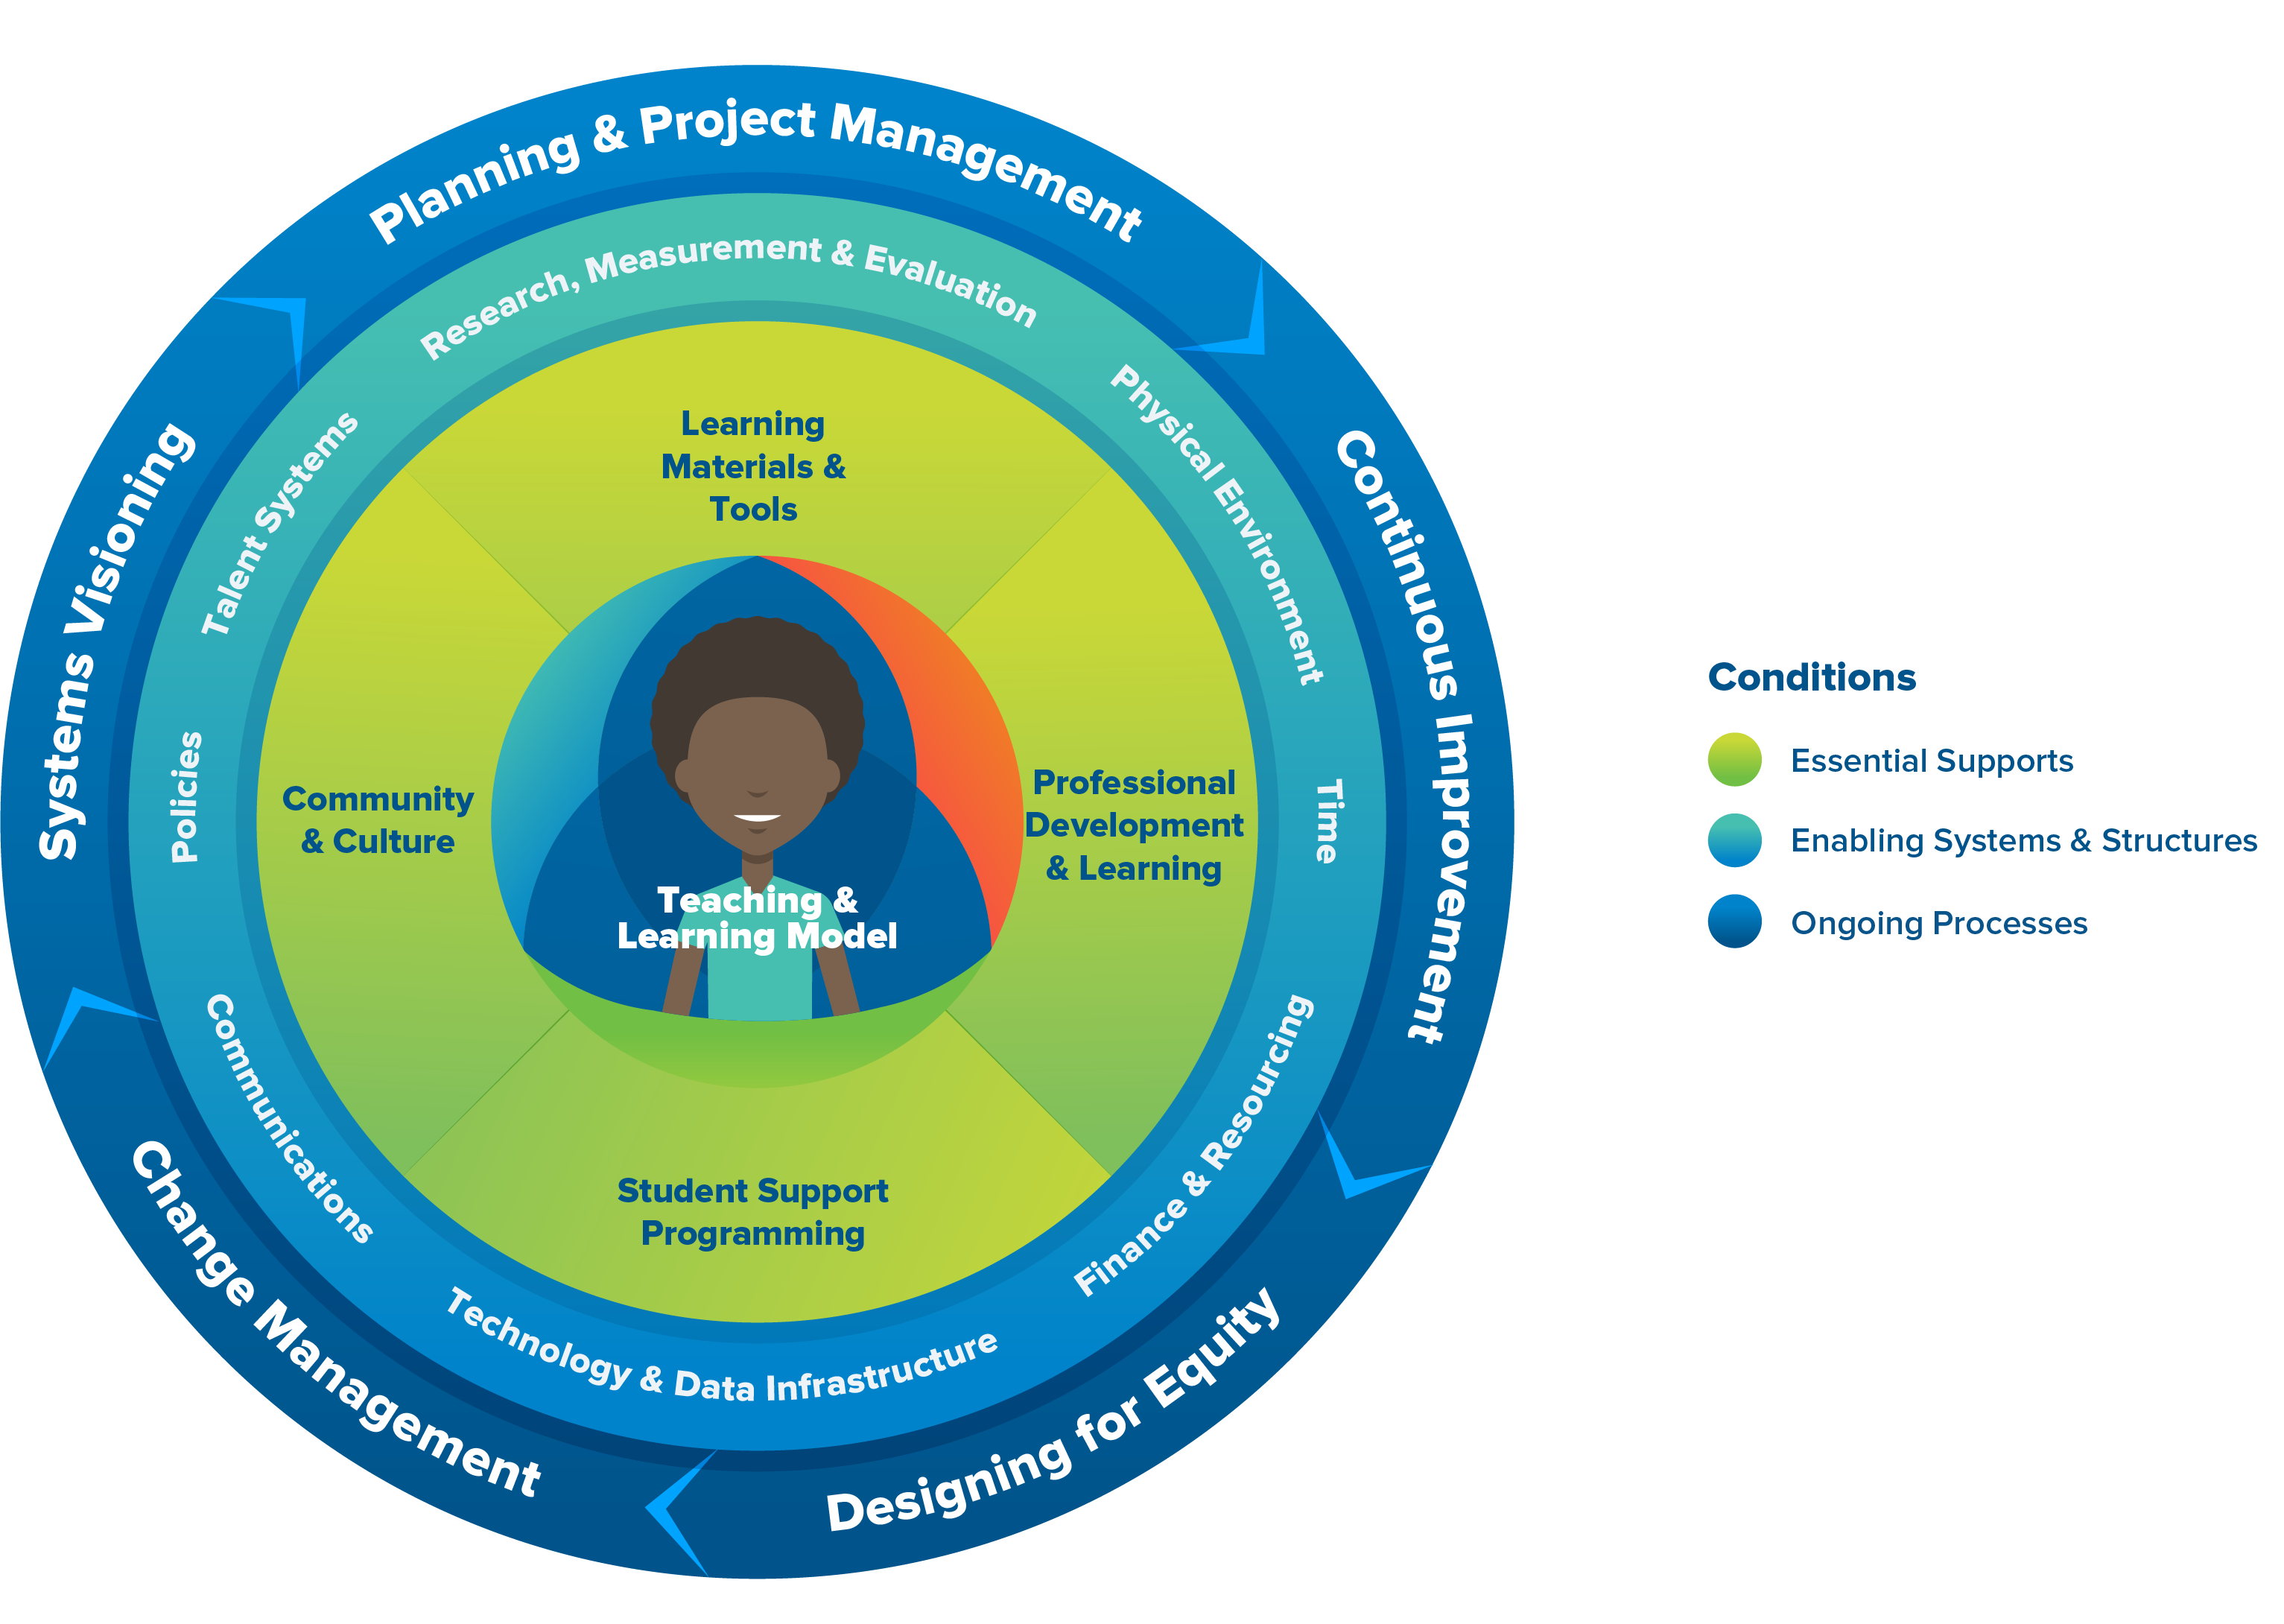 Framework graphic showing Conditions for Success and Scale; a three-part diagram with a student at the center, labeled "Teaching & Learning Model," surrounded by a large green circle split into 4 parts: Learning Materials & Tools, Community & Culture, Student Support Programming, and Professional Development & Learning. This is further surrounded by a thinner turquoise circle, split into several parts: Policies, Talent Systems, Research, Measurement, and Evaluation, Physical Environment, Time, Finance and Resourcing, Technology and Data Infrastructure, and Communications. The outermost circle is split into the following parts: Systems Visioning, Planning and Project Management, Continuous Improvement, Designing for Equity, and Change Management. The Conditions are as follows: innermost circle- Essential Supports, middle circle- Enabling Systems & Structures, outermost circle-Ongoing Processes.
